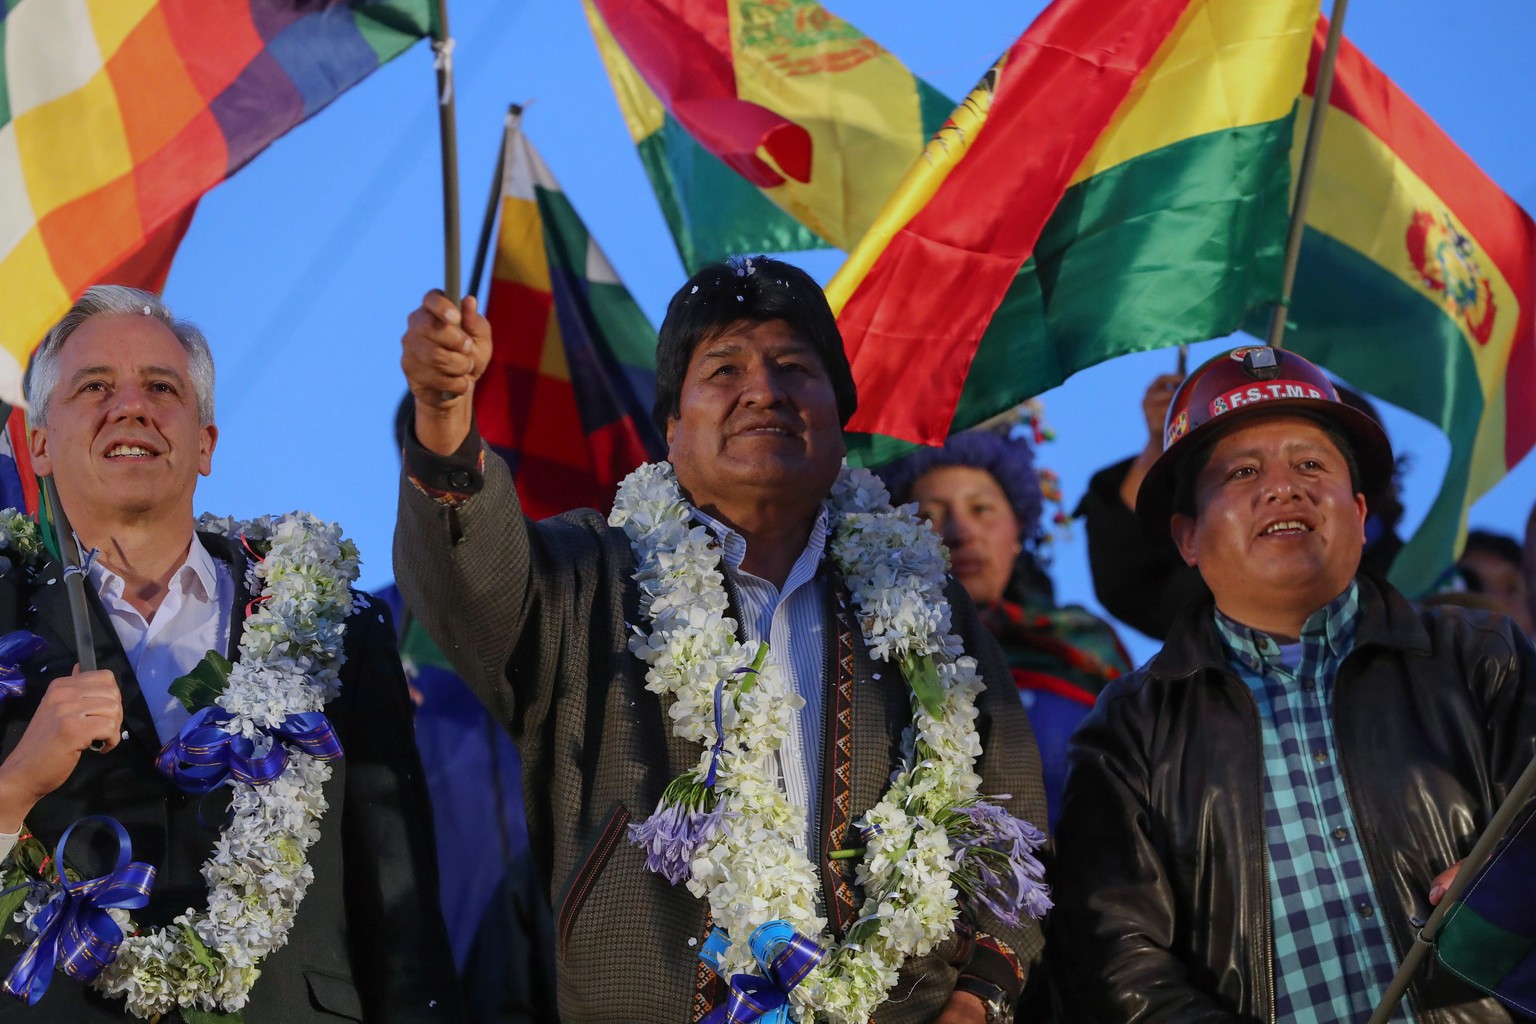 epa07957209 President of Bolivia Evo Morales (C) and Vice President Alvaro Garcia Linera (L) participate in an event in El Alto, Bolivia, 28 October 2019. Morales called on supporters to defend the he ...